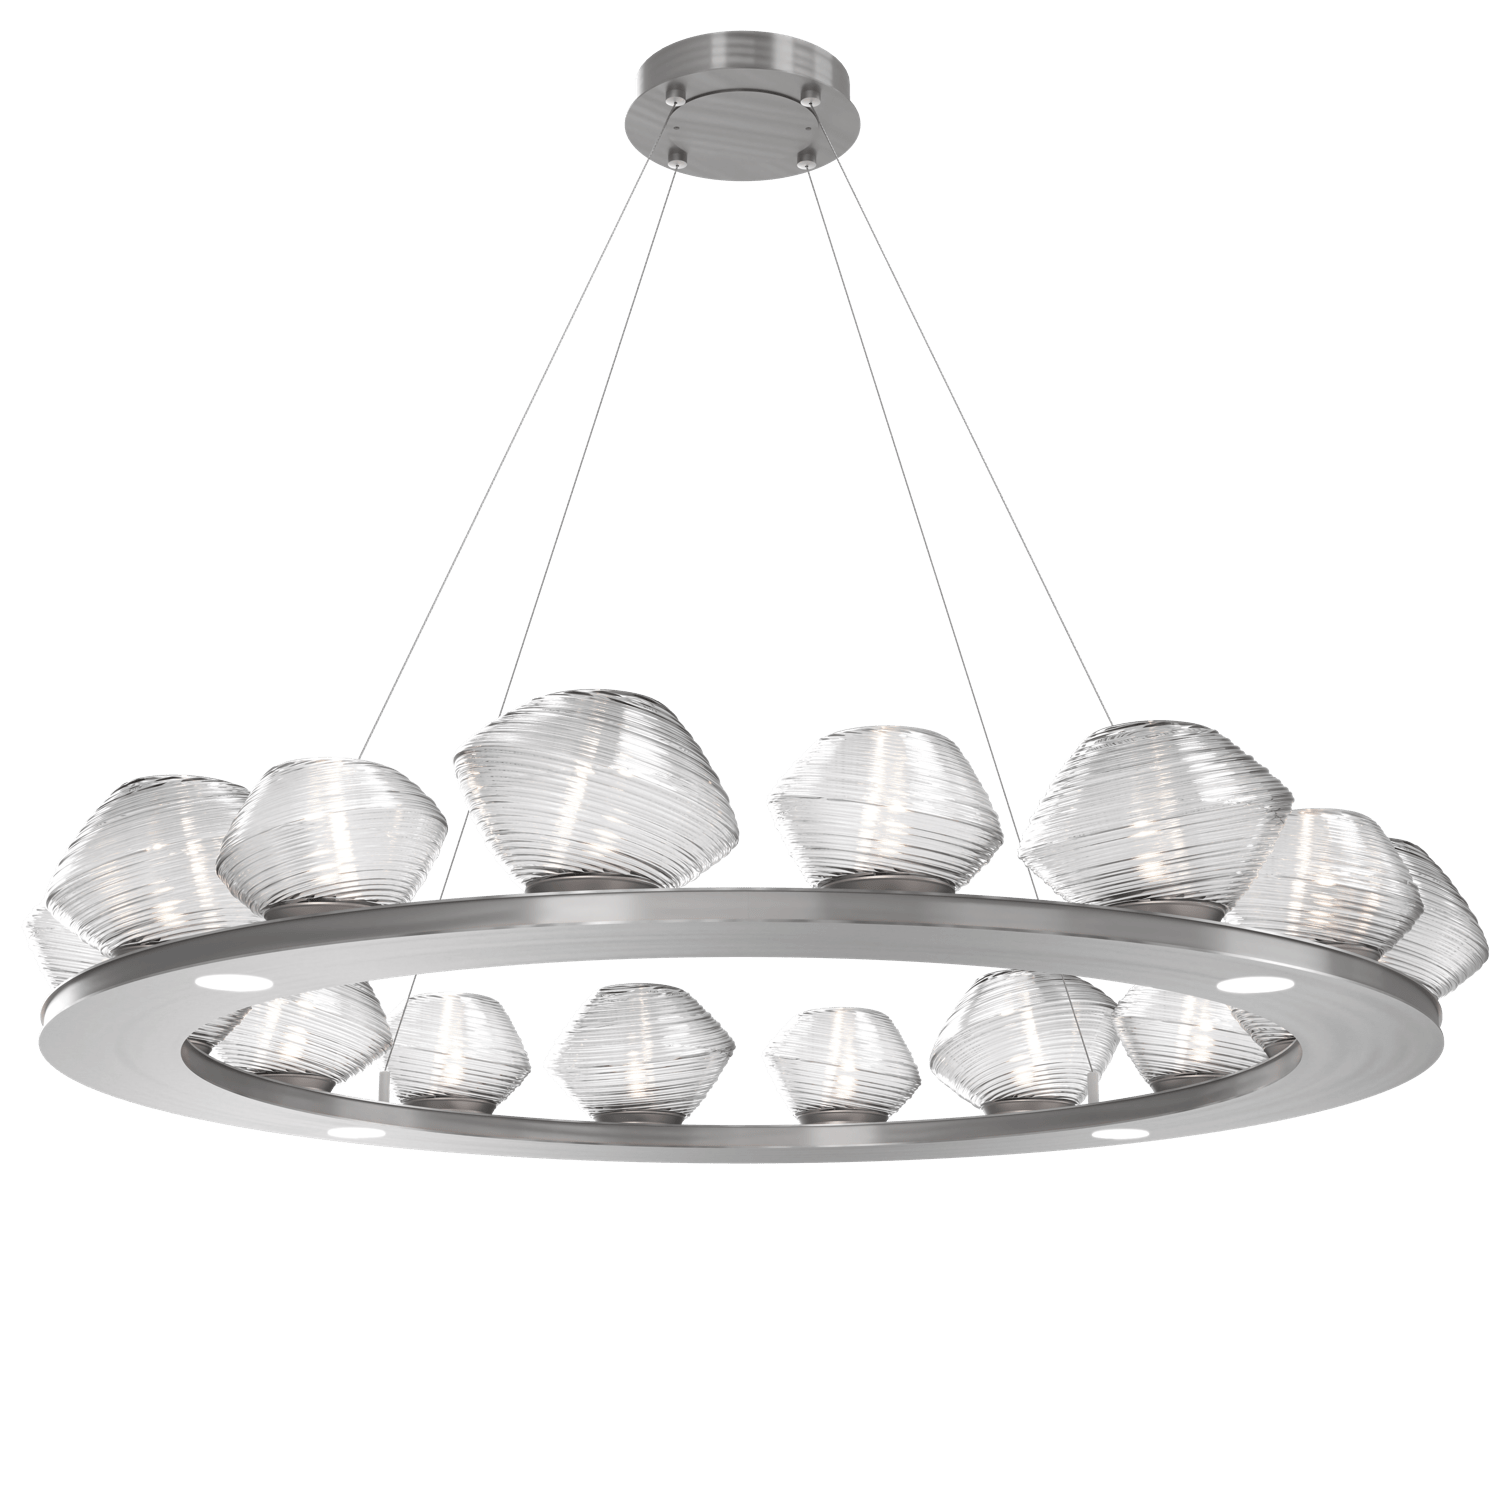 CHB0089-0D-SN-C-Hammerton-Studio-Mesa-48-inch-ring-chandelier-with-satin-nickel-finish-and-clear-blown-glass-shades-and-LED-lamping